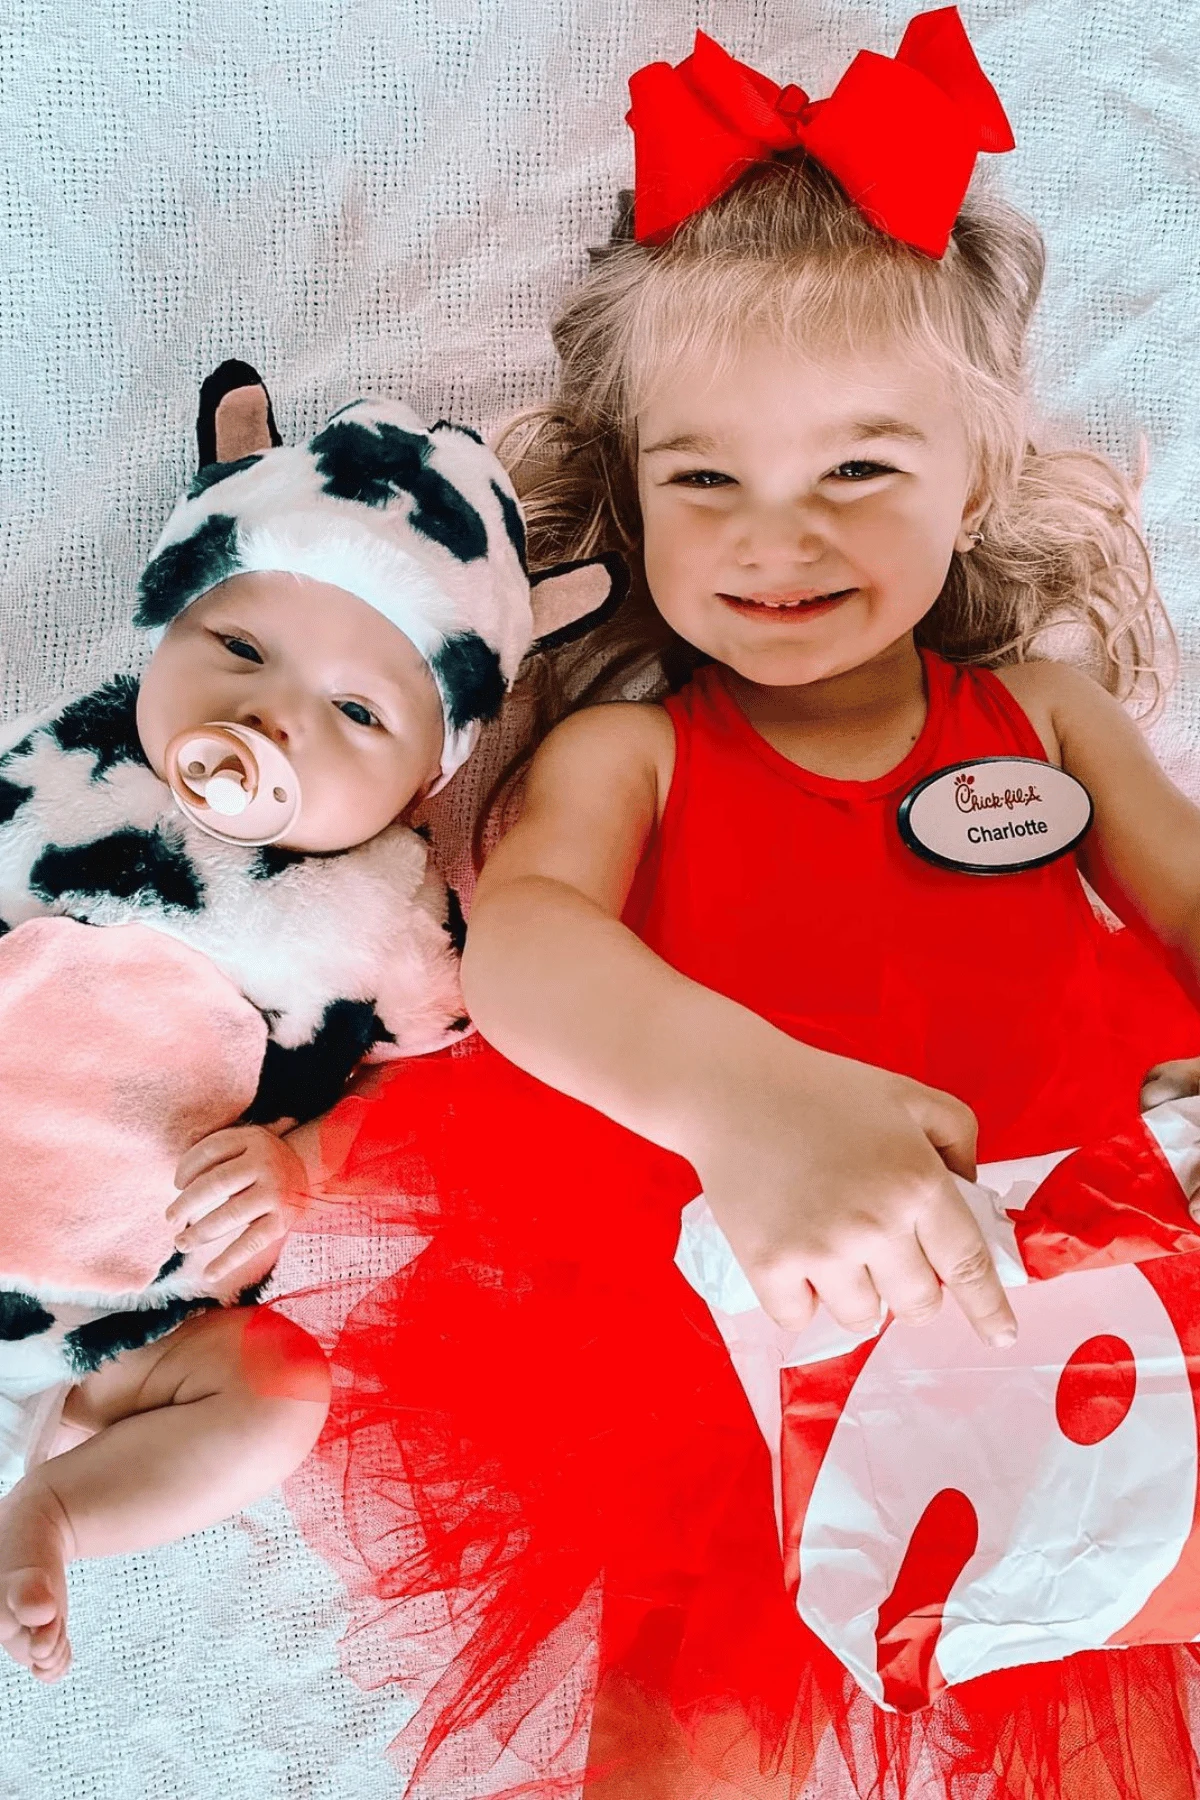 Baby dressed as a cow and toddler dressed as a Chik-Fil-A worker